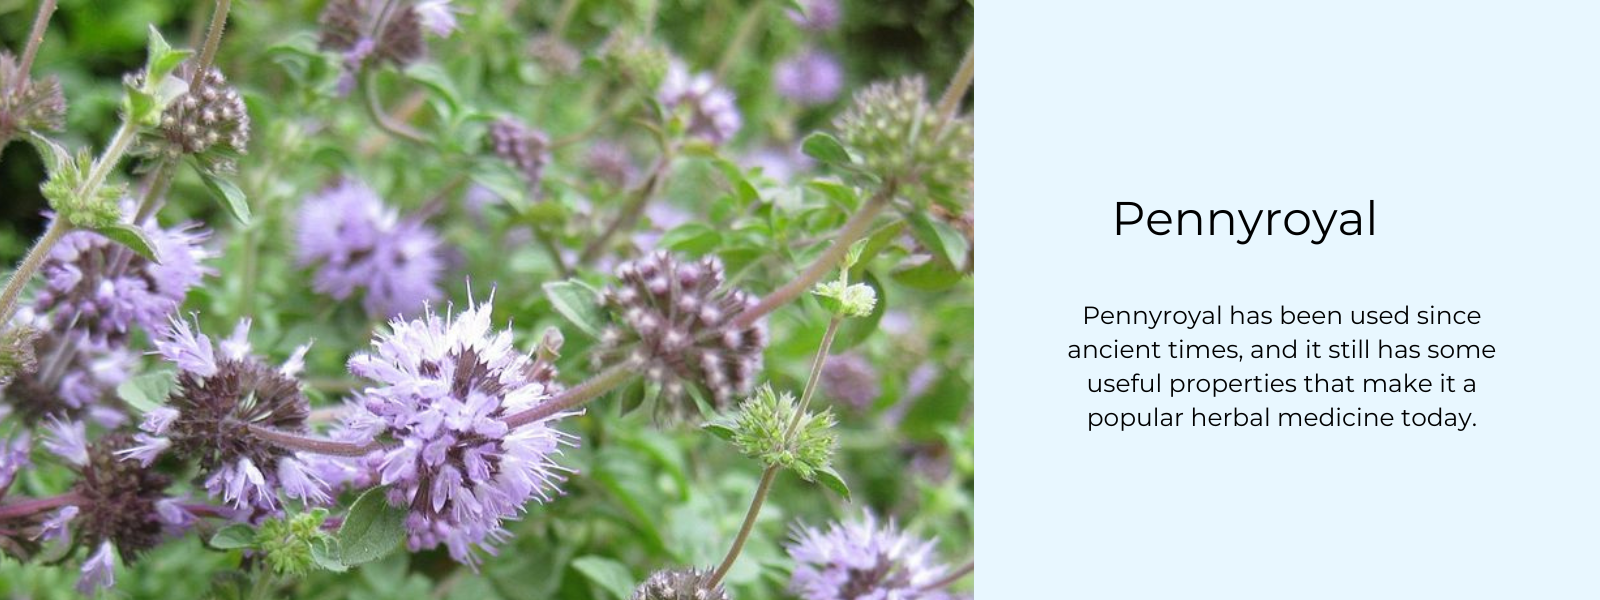 Pennyroyal - Health Benefits, Uses and Important Facts